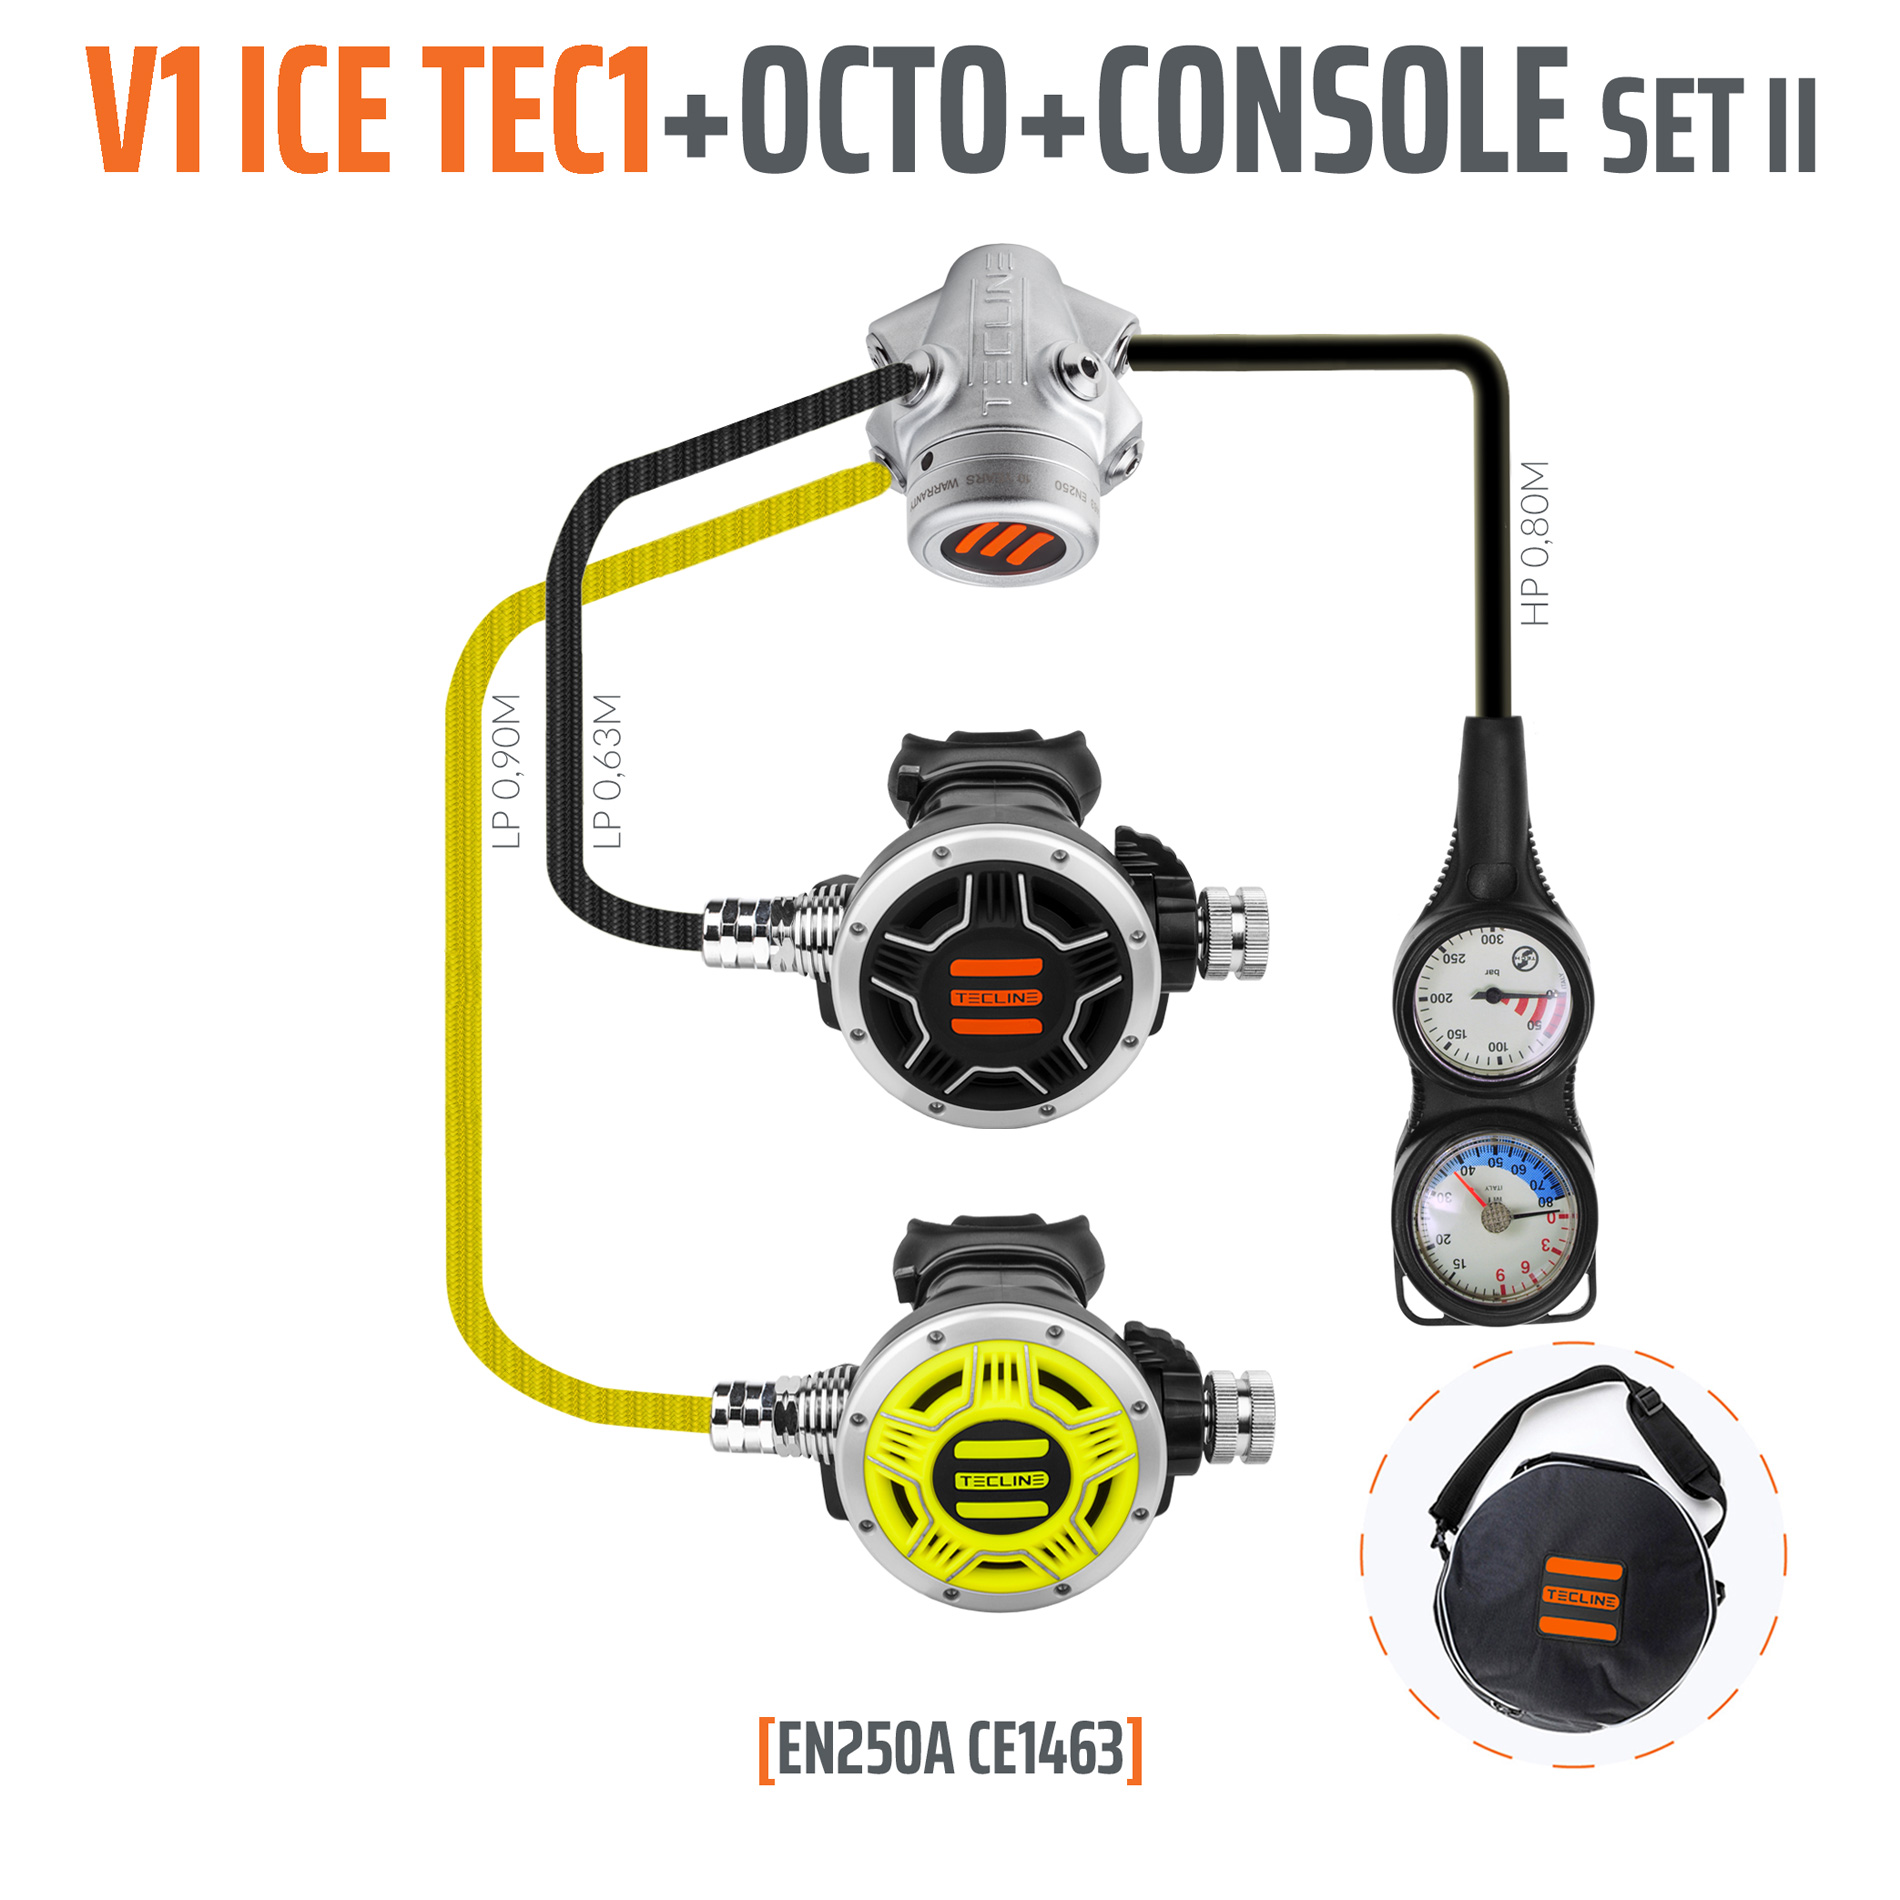 Tecline Regulator V1 ICE TEC1 set II with octo and 2 element console - EN250A